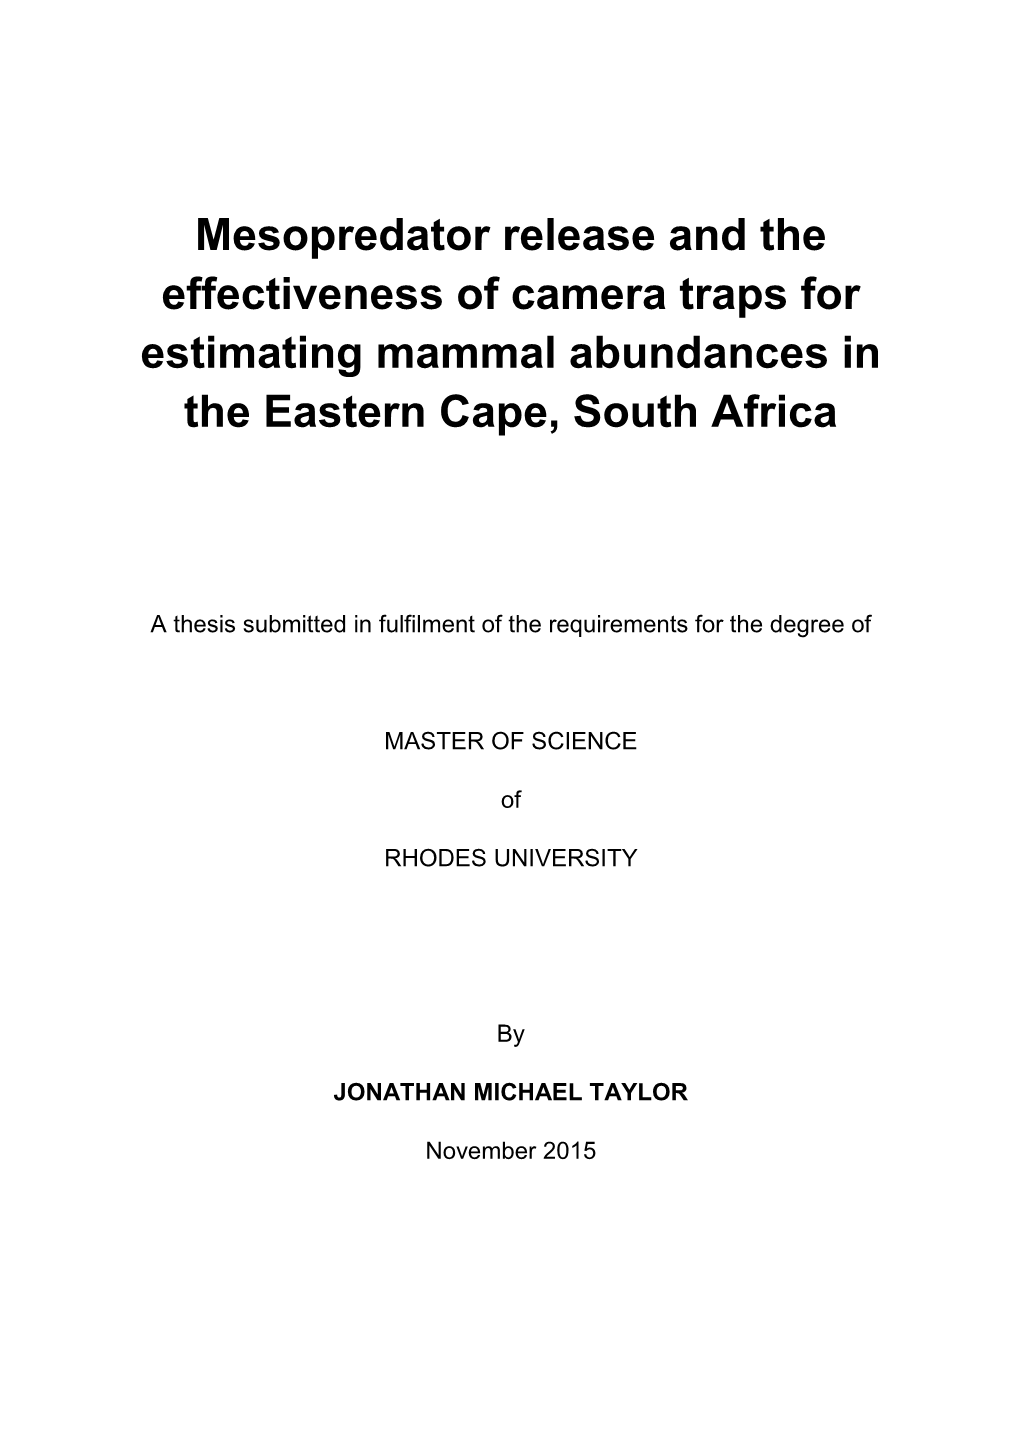 Mesopredator Release and the Effectiveness of Camera Traps for Estimating Mammal Abundances in the Eastern Cape, South Africa